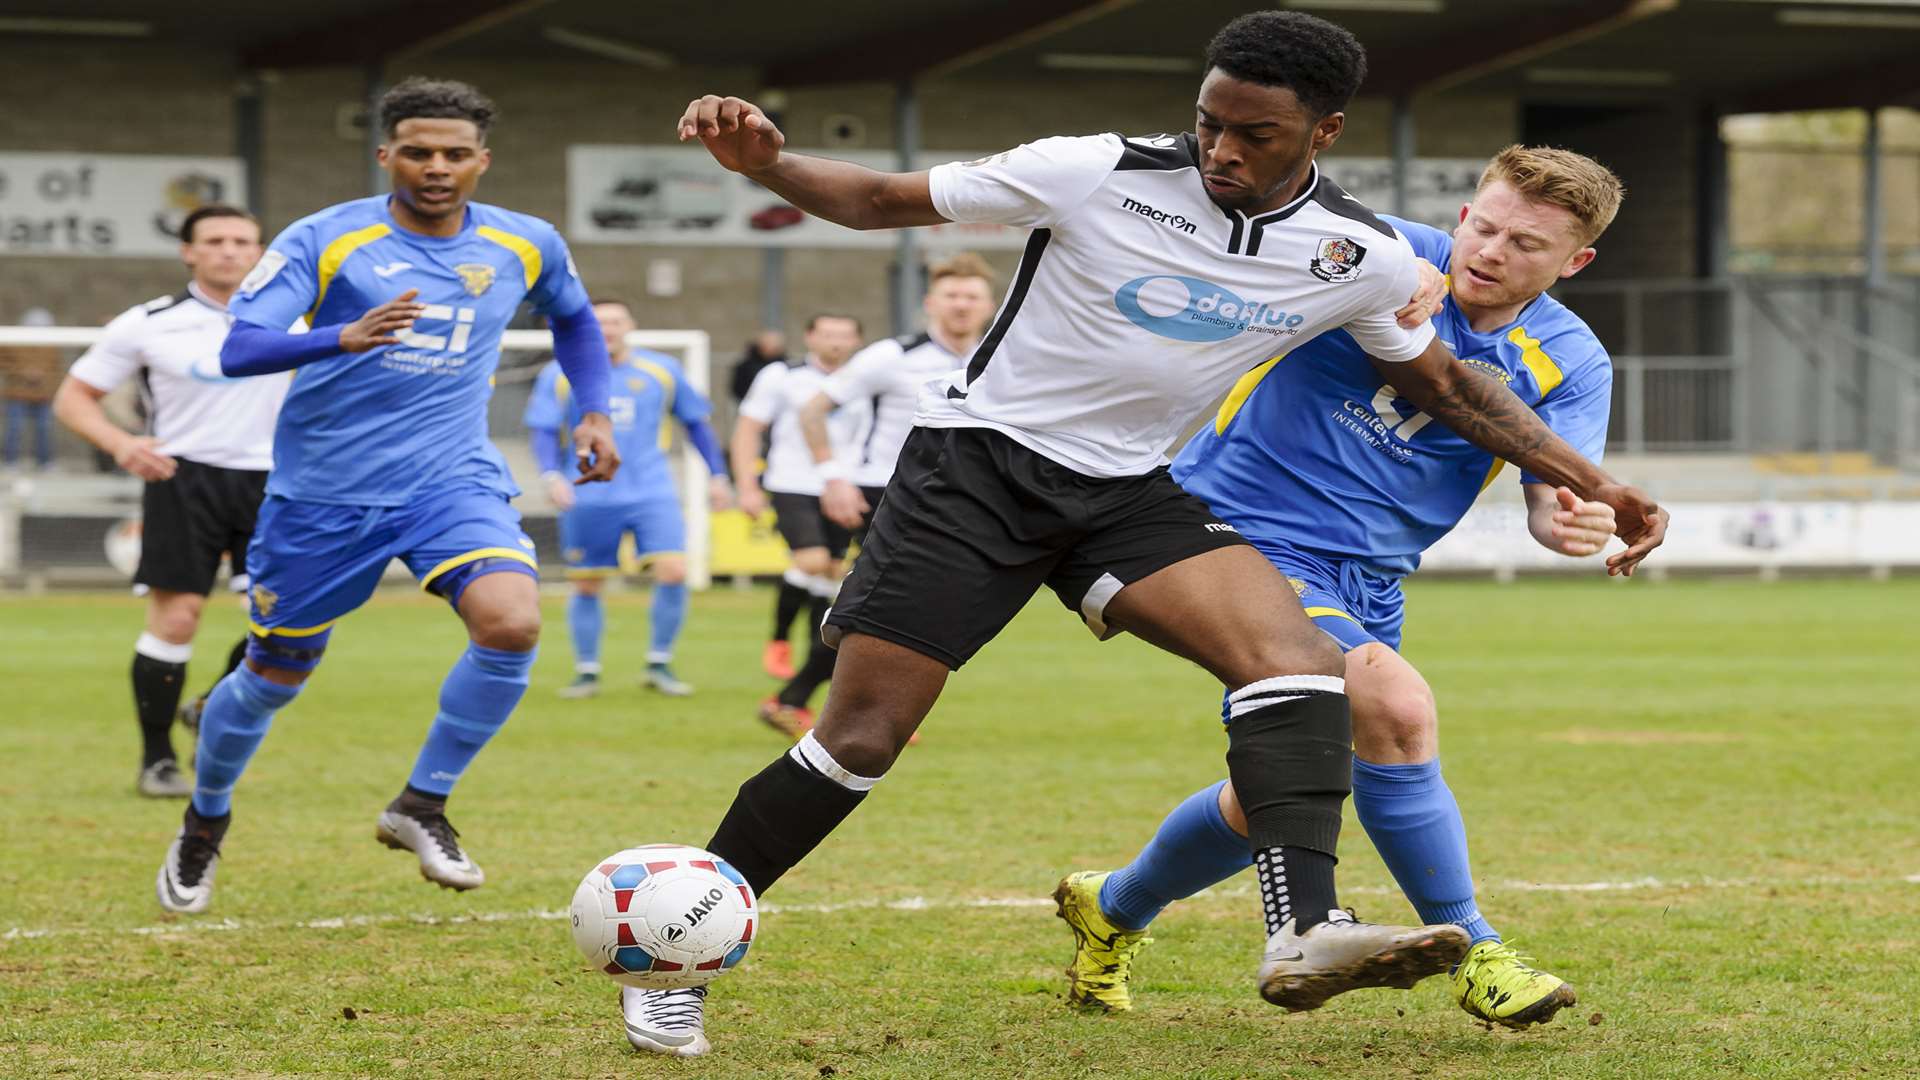 Dartford were held to a 0-0 draw by relegated Basingstoke Picture: Andy Payton